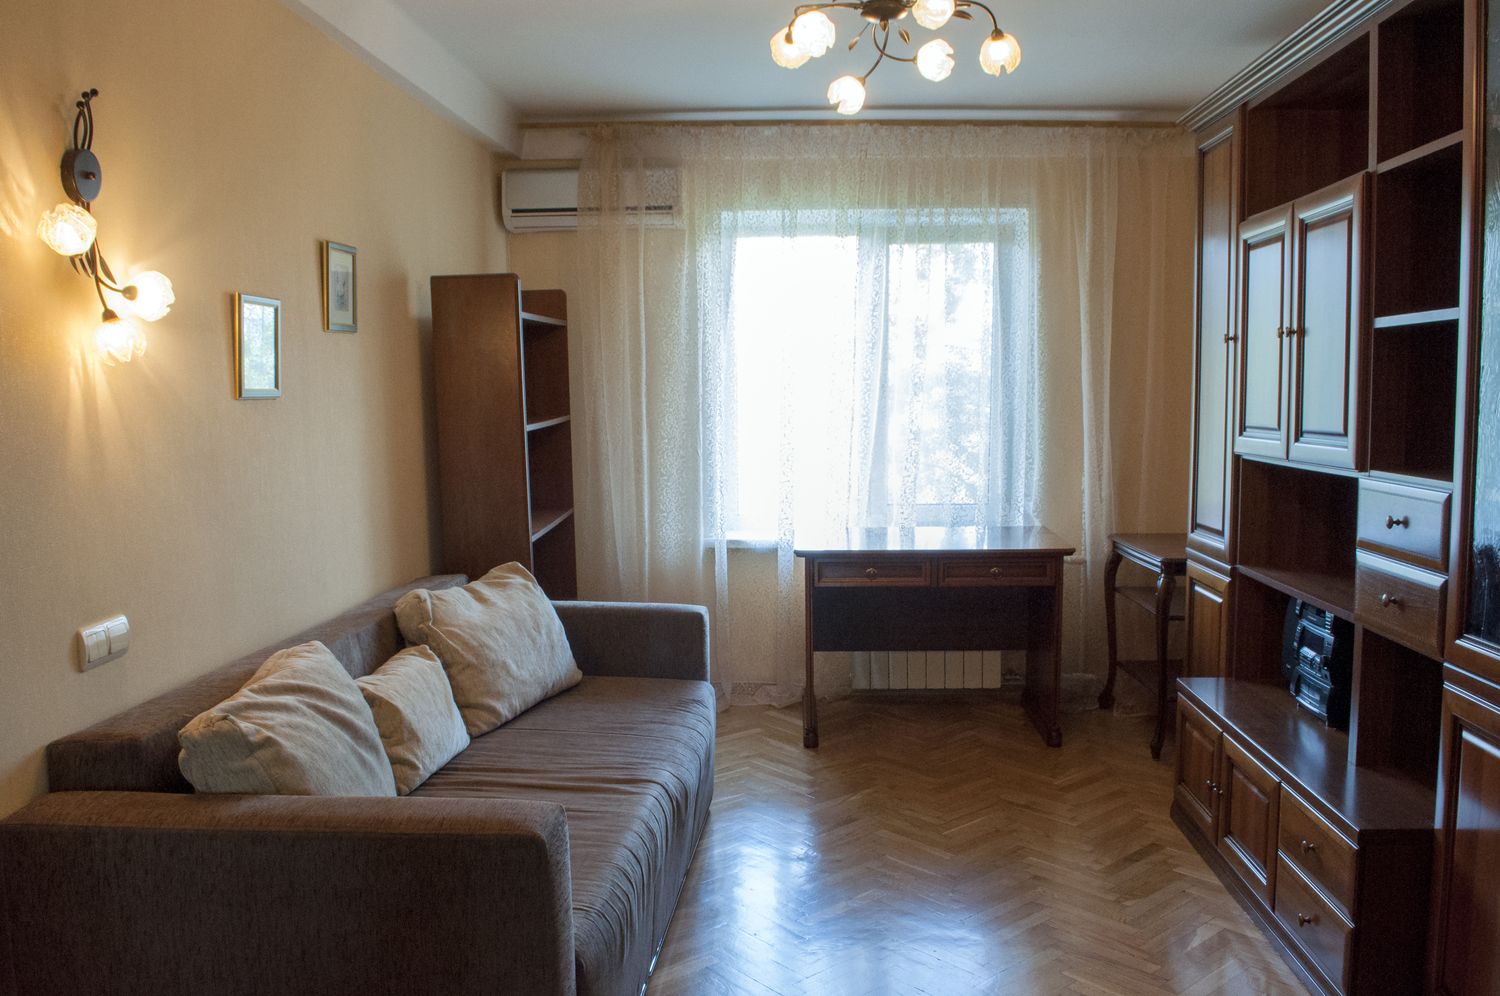 3-bedrooms apartment on the obolonskiy avenue 16a